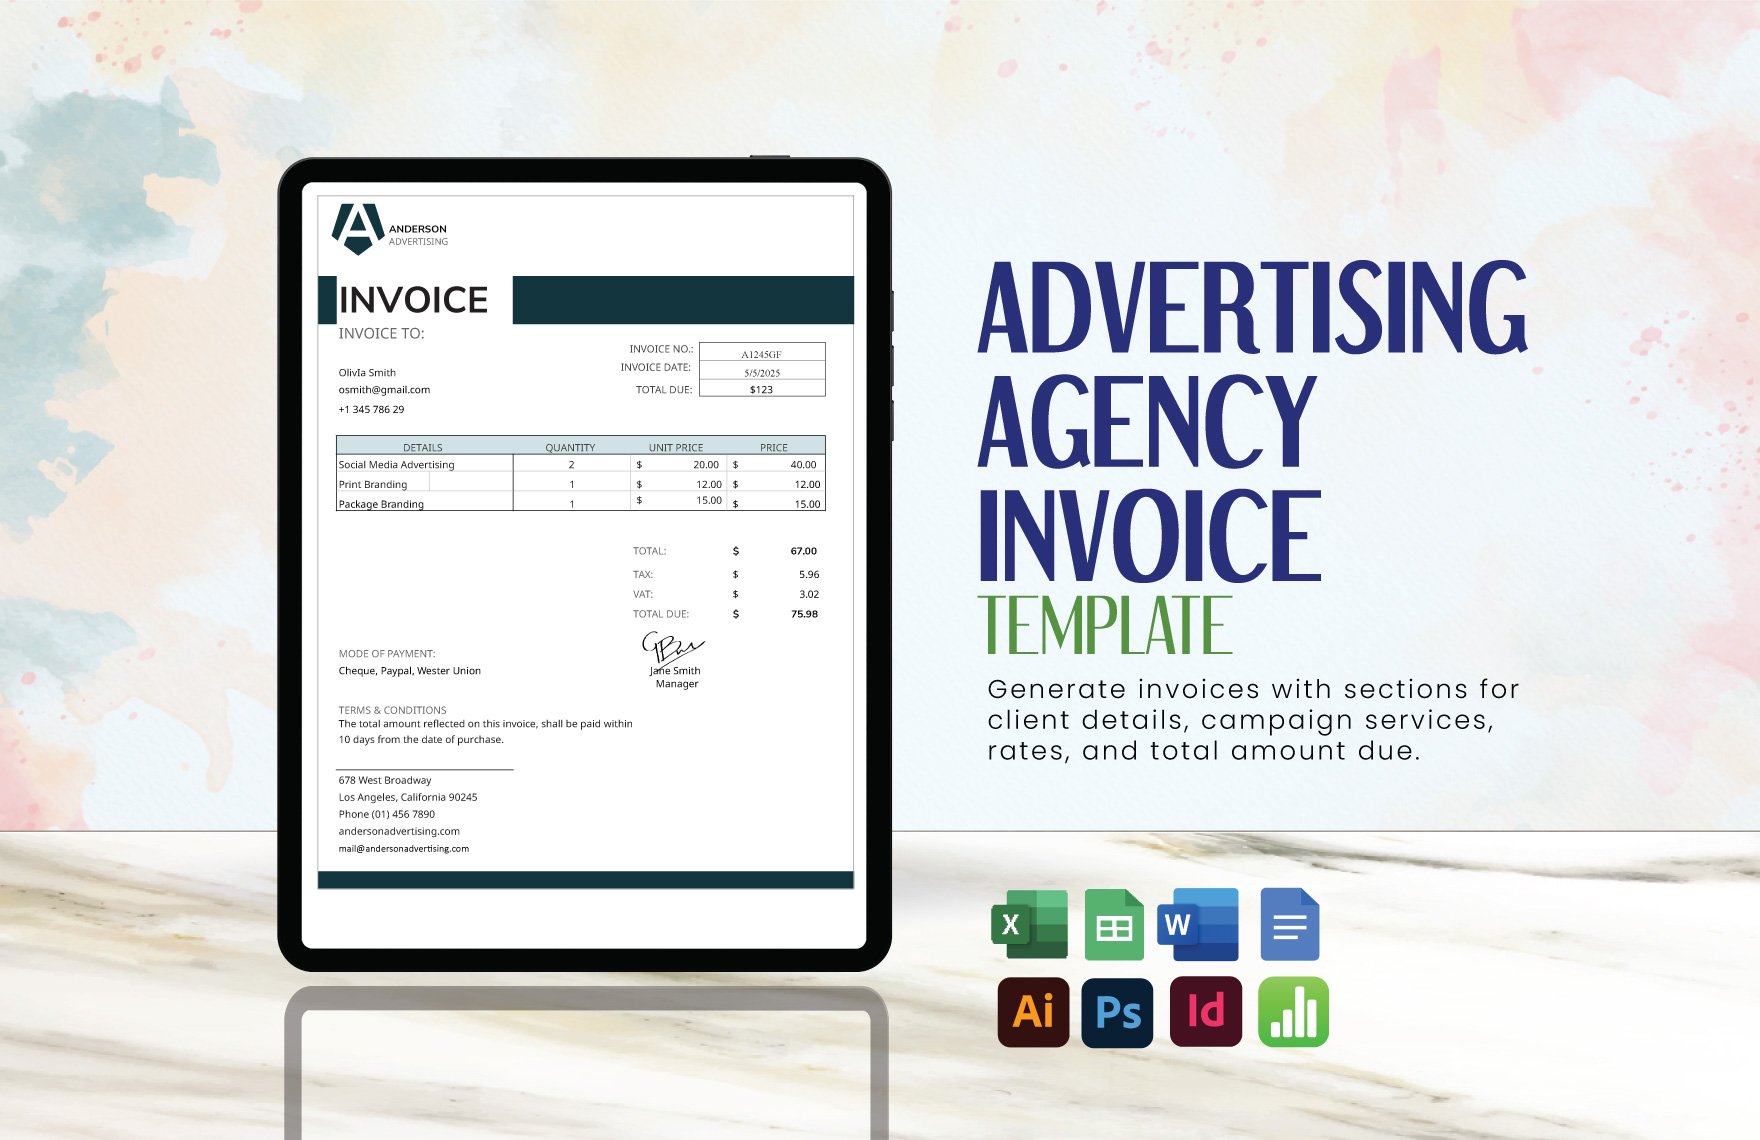 Free Advertising agency Invoice Template in Word, Google Docs, Excel, Google Sheets, Illustrator, PSD, InDesign, Apple Numbers